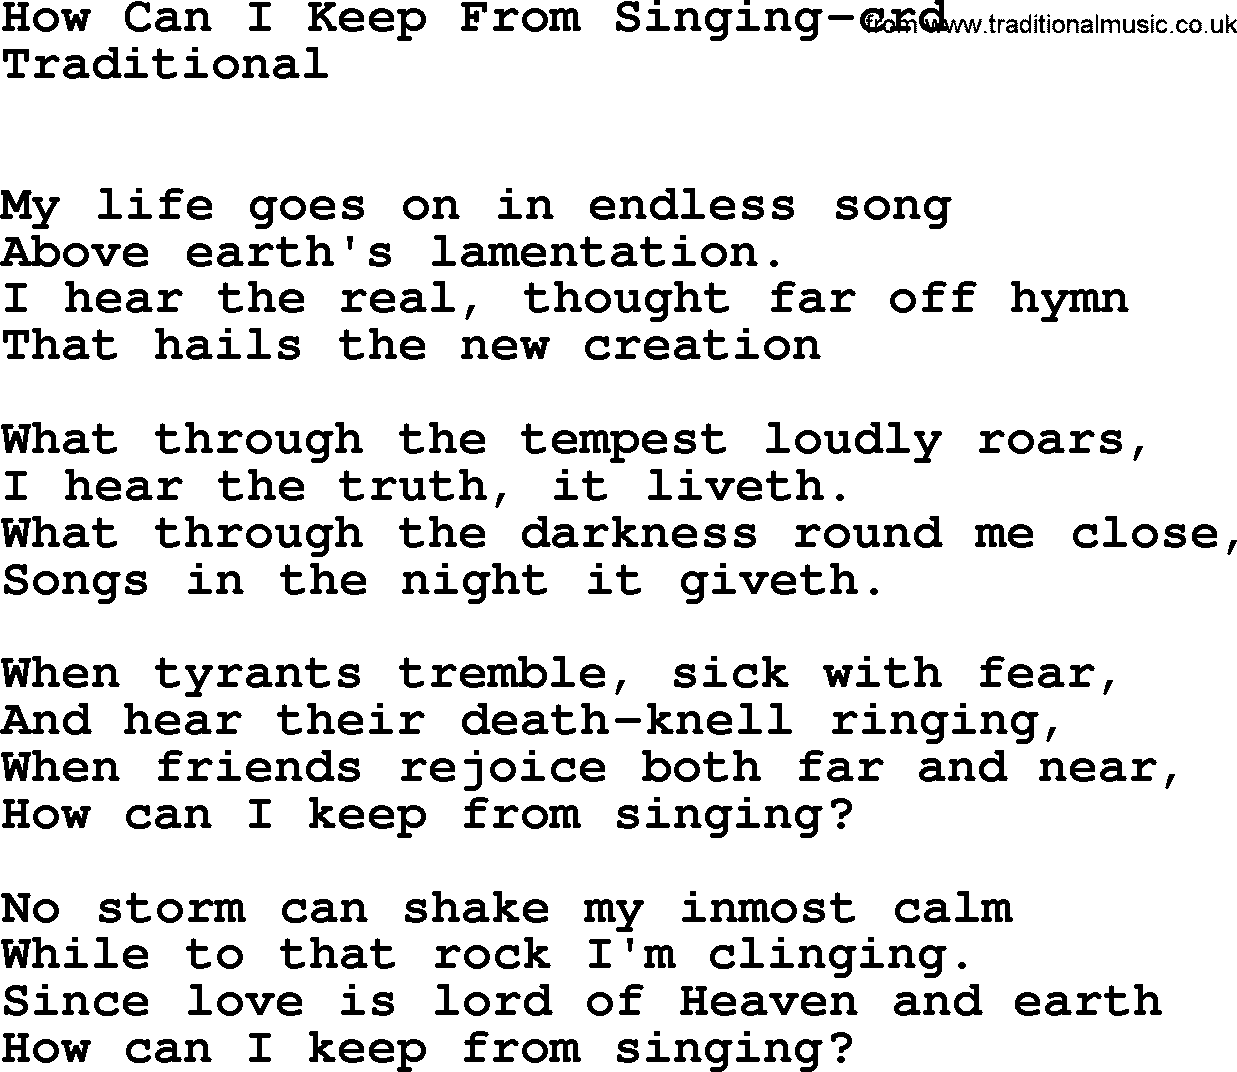 Bruce Springsteen song: How Can I Keep From Singing, lyrics and chords